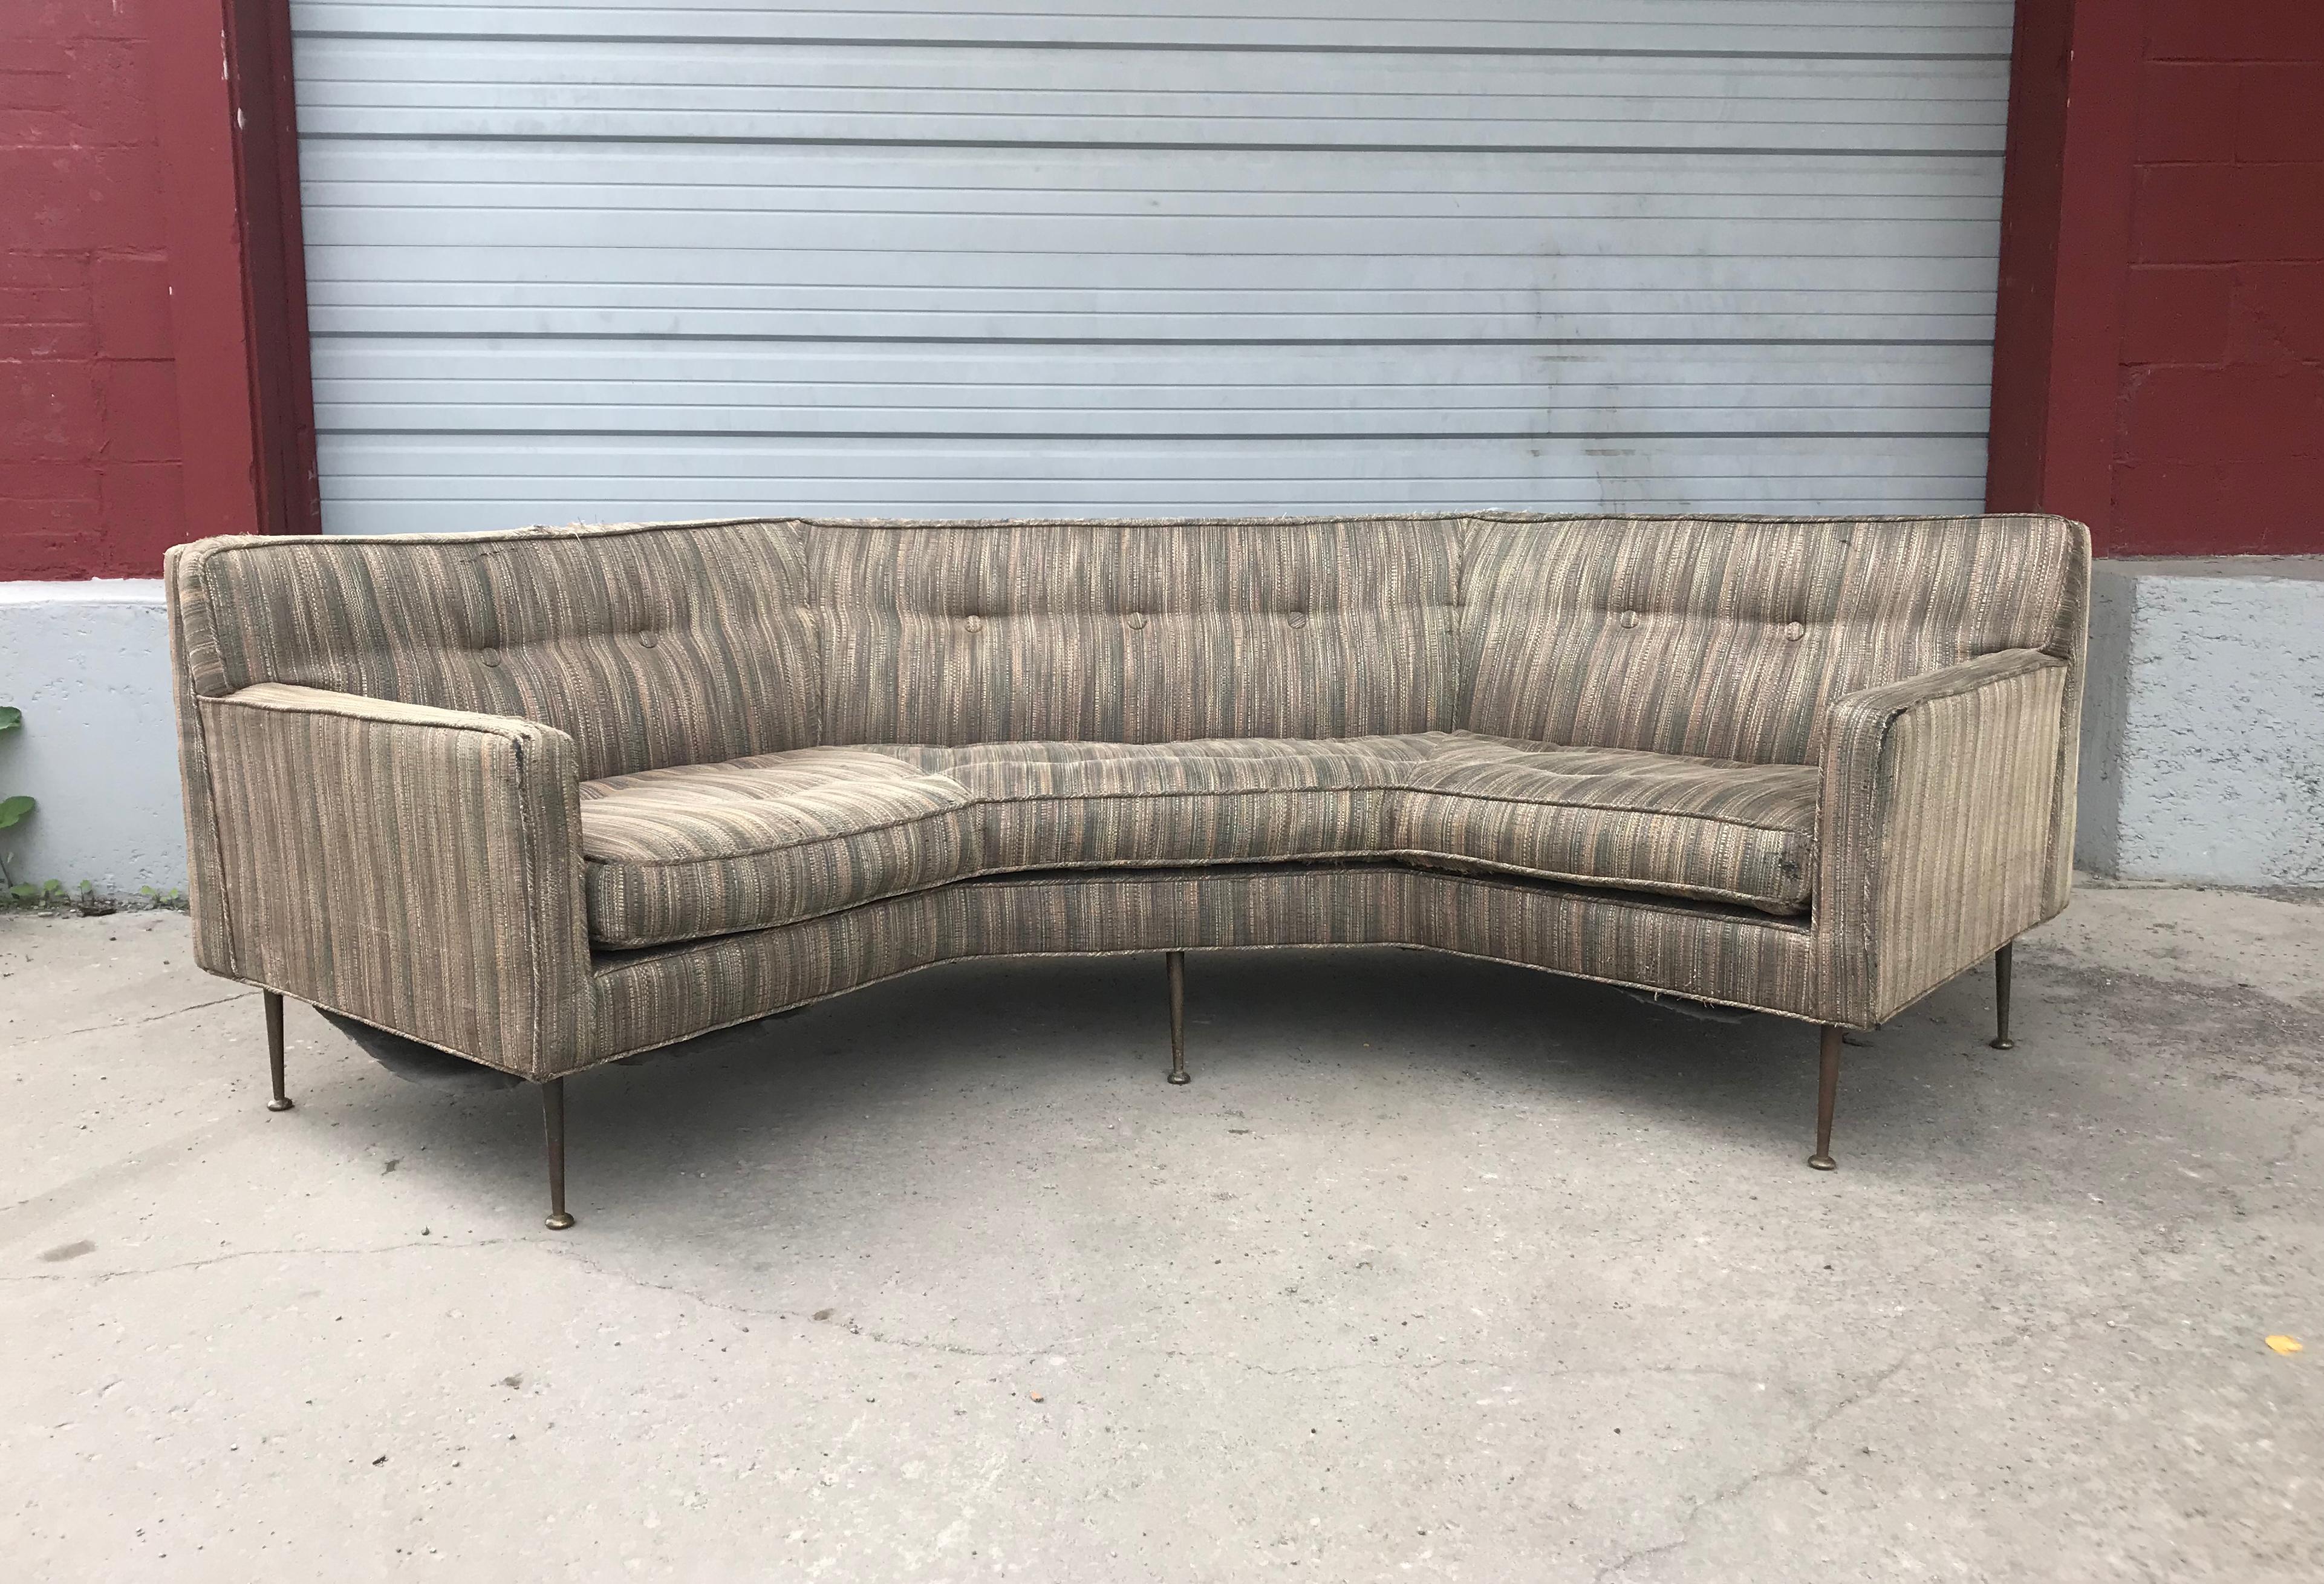 Stunning Modernist angled sofa attributed to Edward Wormley for Dunbar. Solid brass legs, Amazing quality, construction and design. Retains original fabric. in need or restoration.